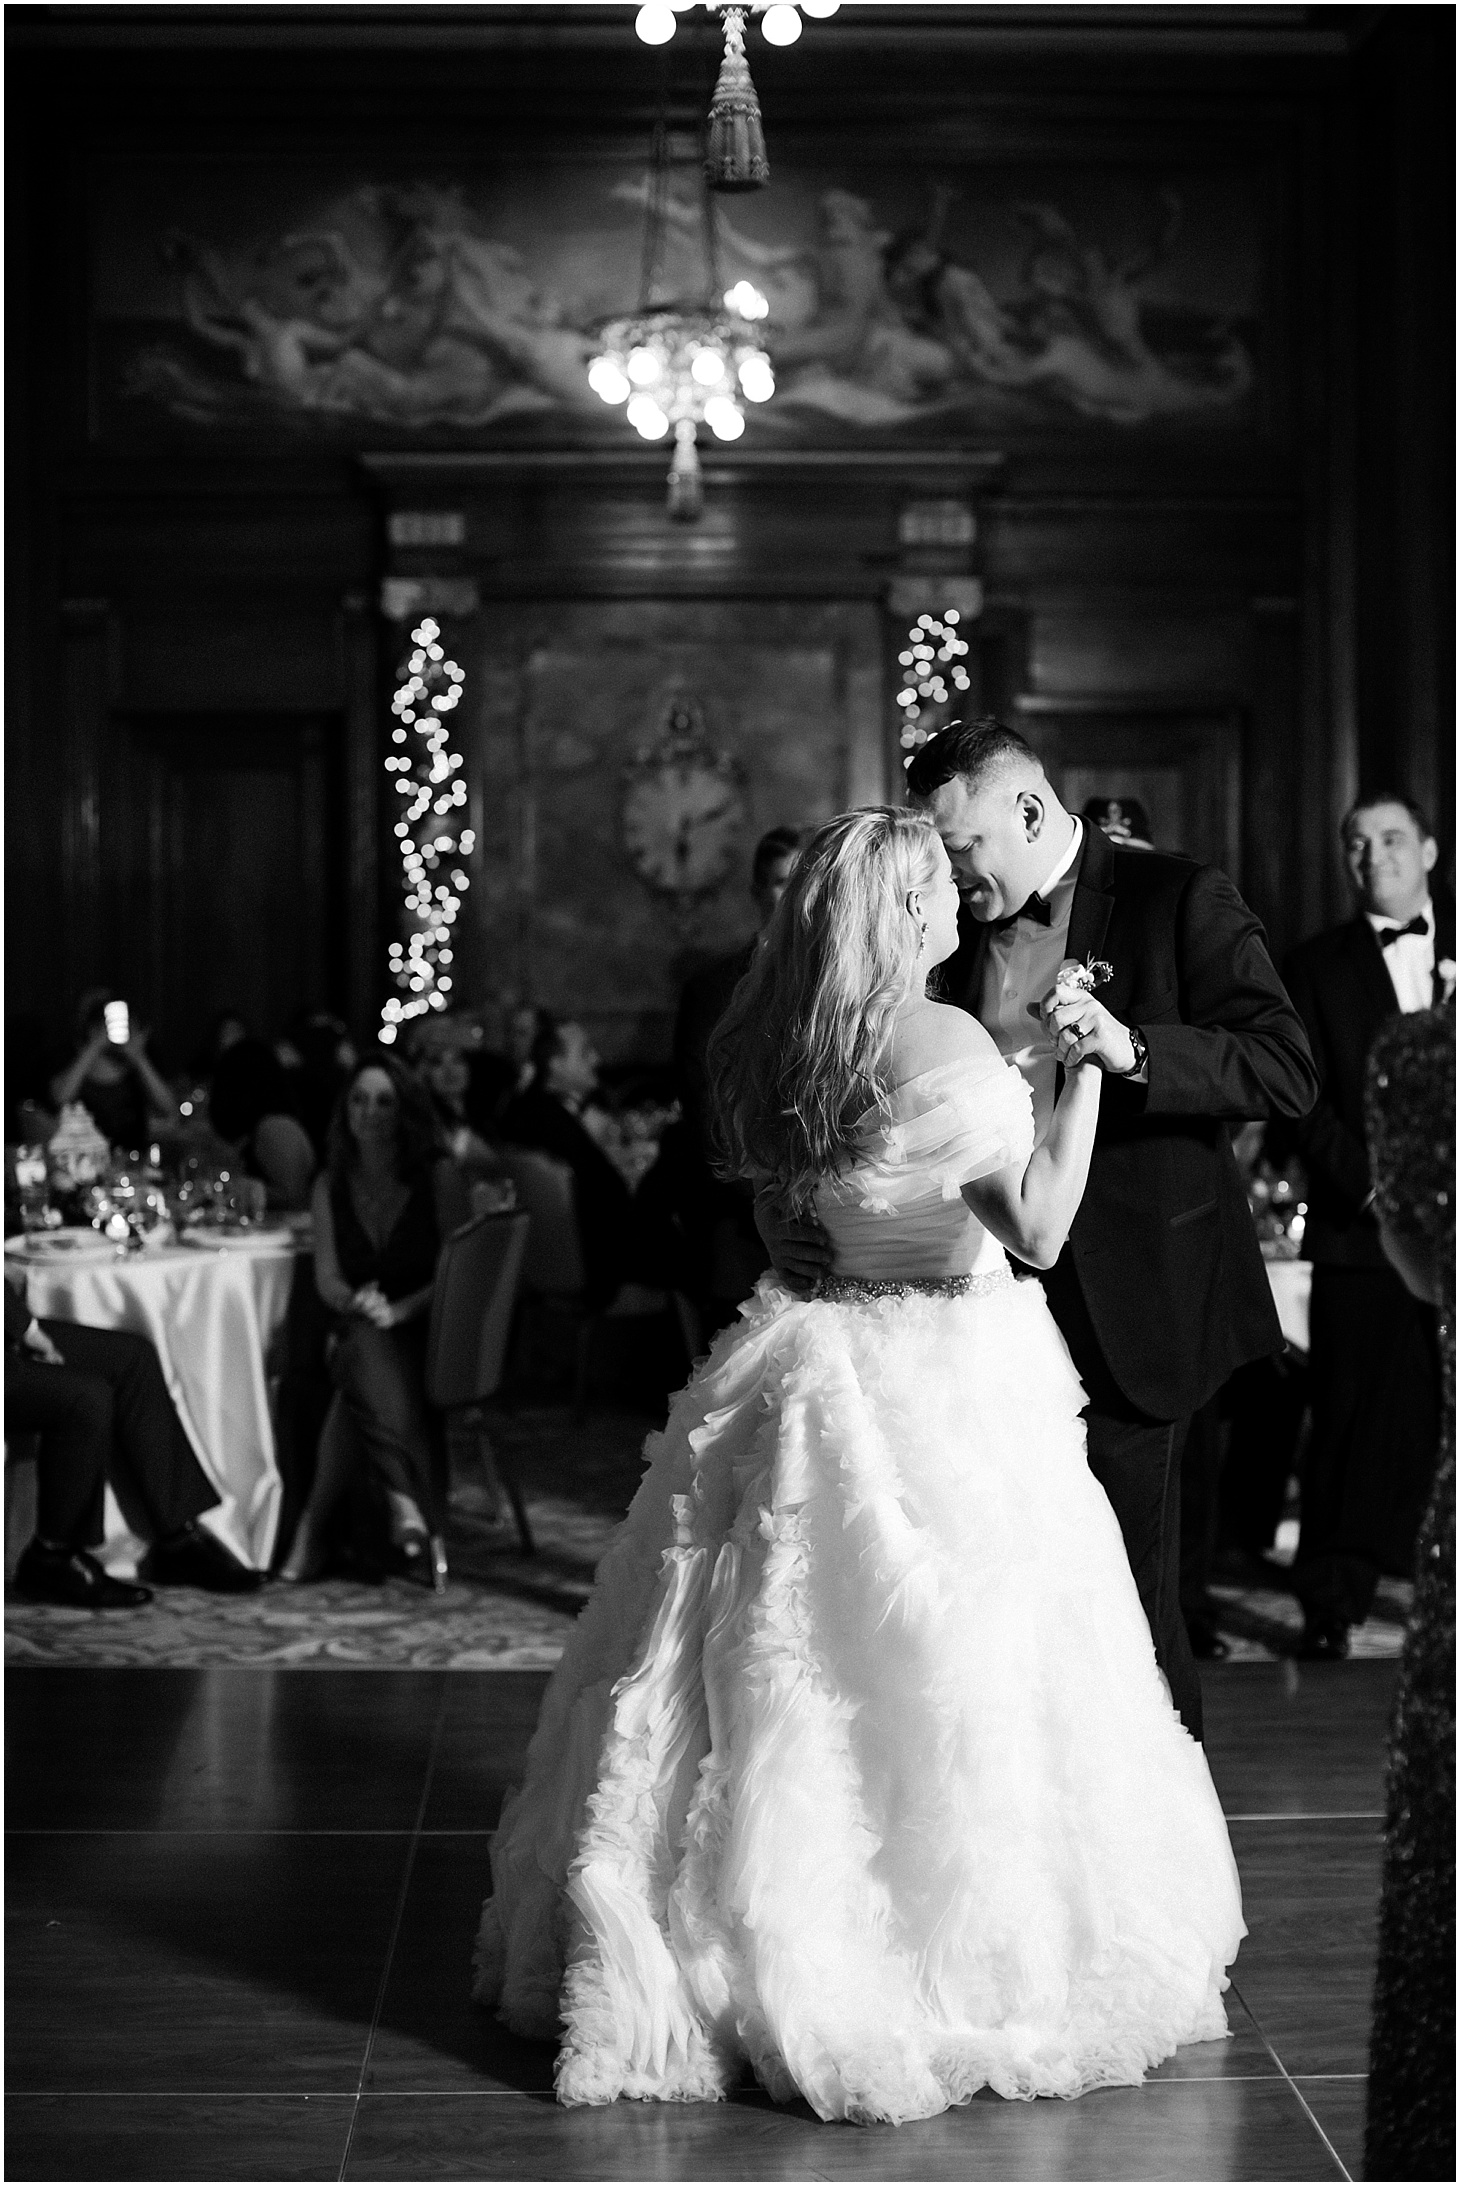 First Dance at the Army and Navy Club | Luxe Winter Wedding in Washington, DC | Sarah Bradshaw Photography | Washington DC Wedding Photographer